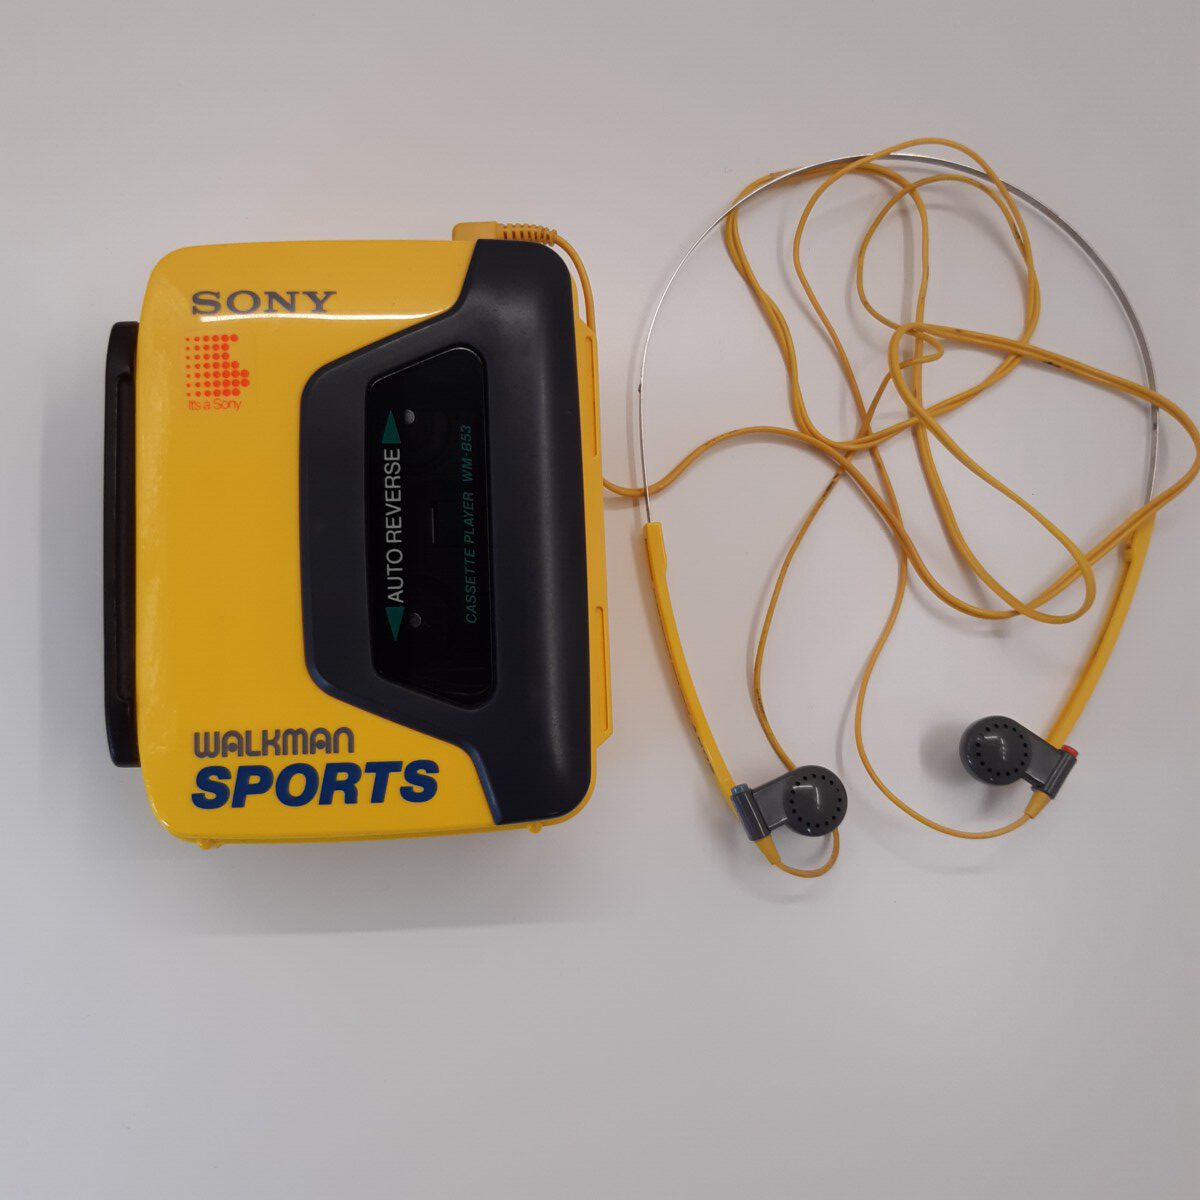 Sports Walkman WM-B53 by Sony. Comes With the Original Mdr-w15 Headphones.  Great Working Condition 